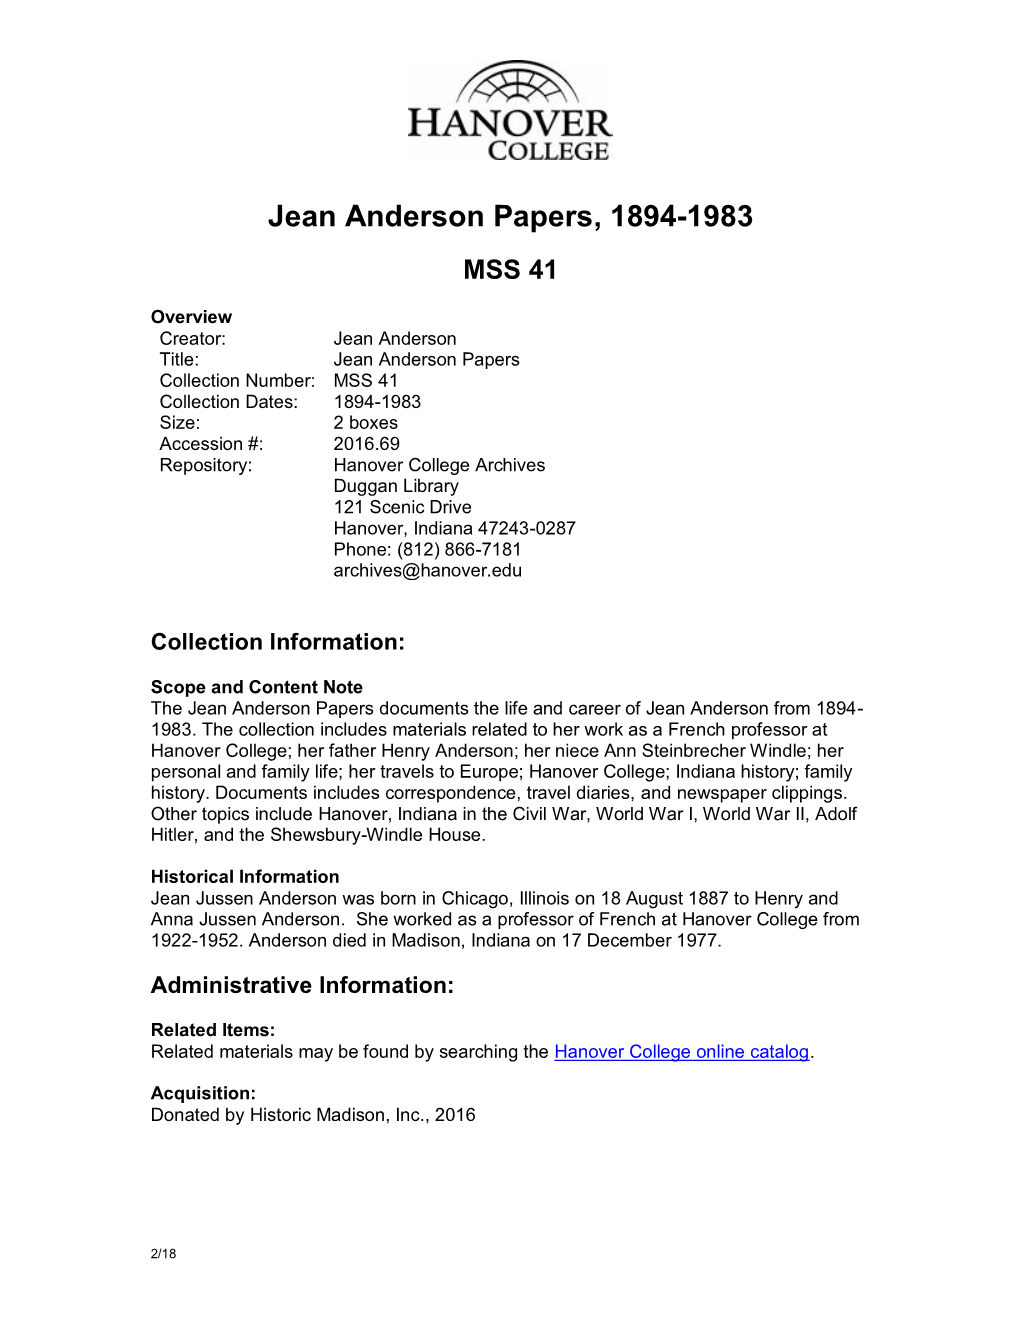 Jean Anderson Papers, 1894-1983